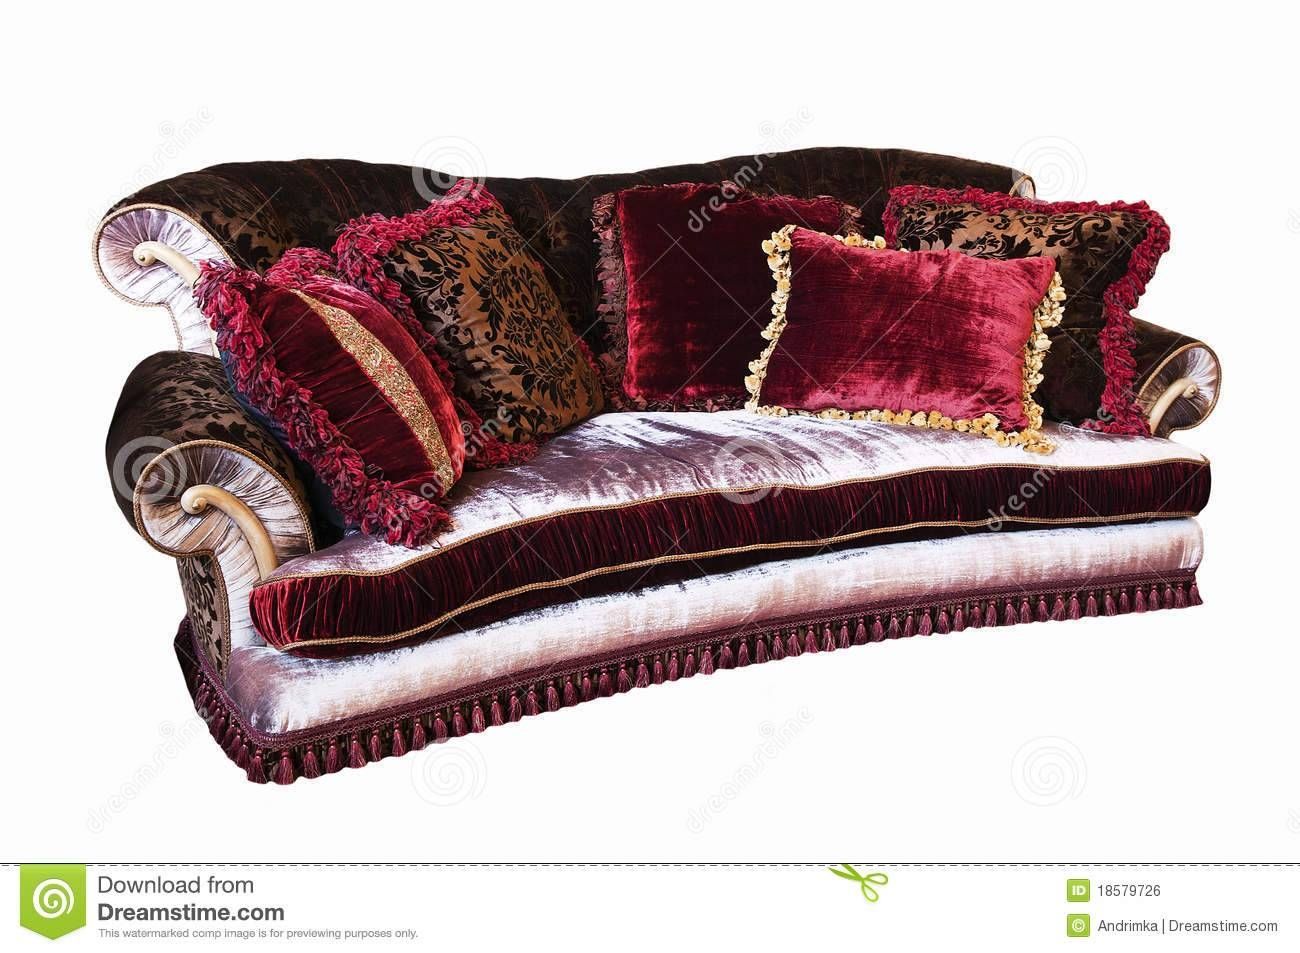 Old Fashioned Sofa Royalty Free Stock Image – Image: 18579726 Pertaining To Old Fashioned Sofas (View 10 of 30)